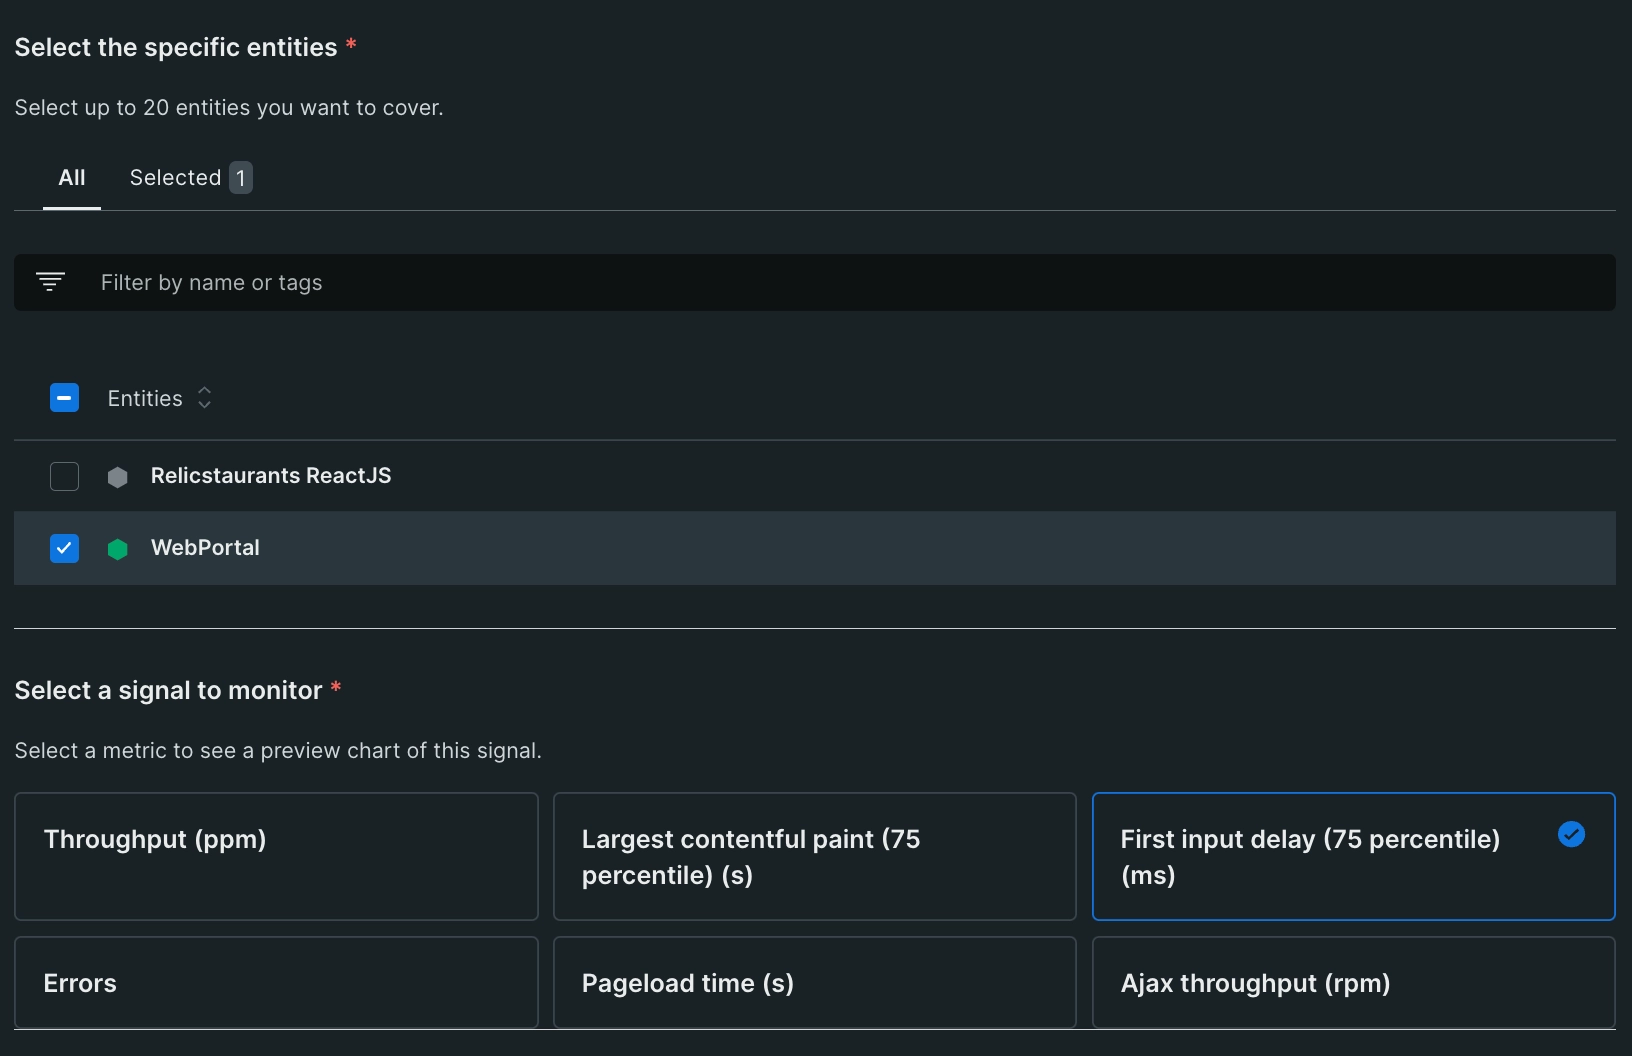 A screenshot displaying the entities selection screen for golden metrics alerts